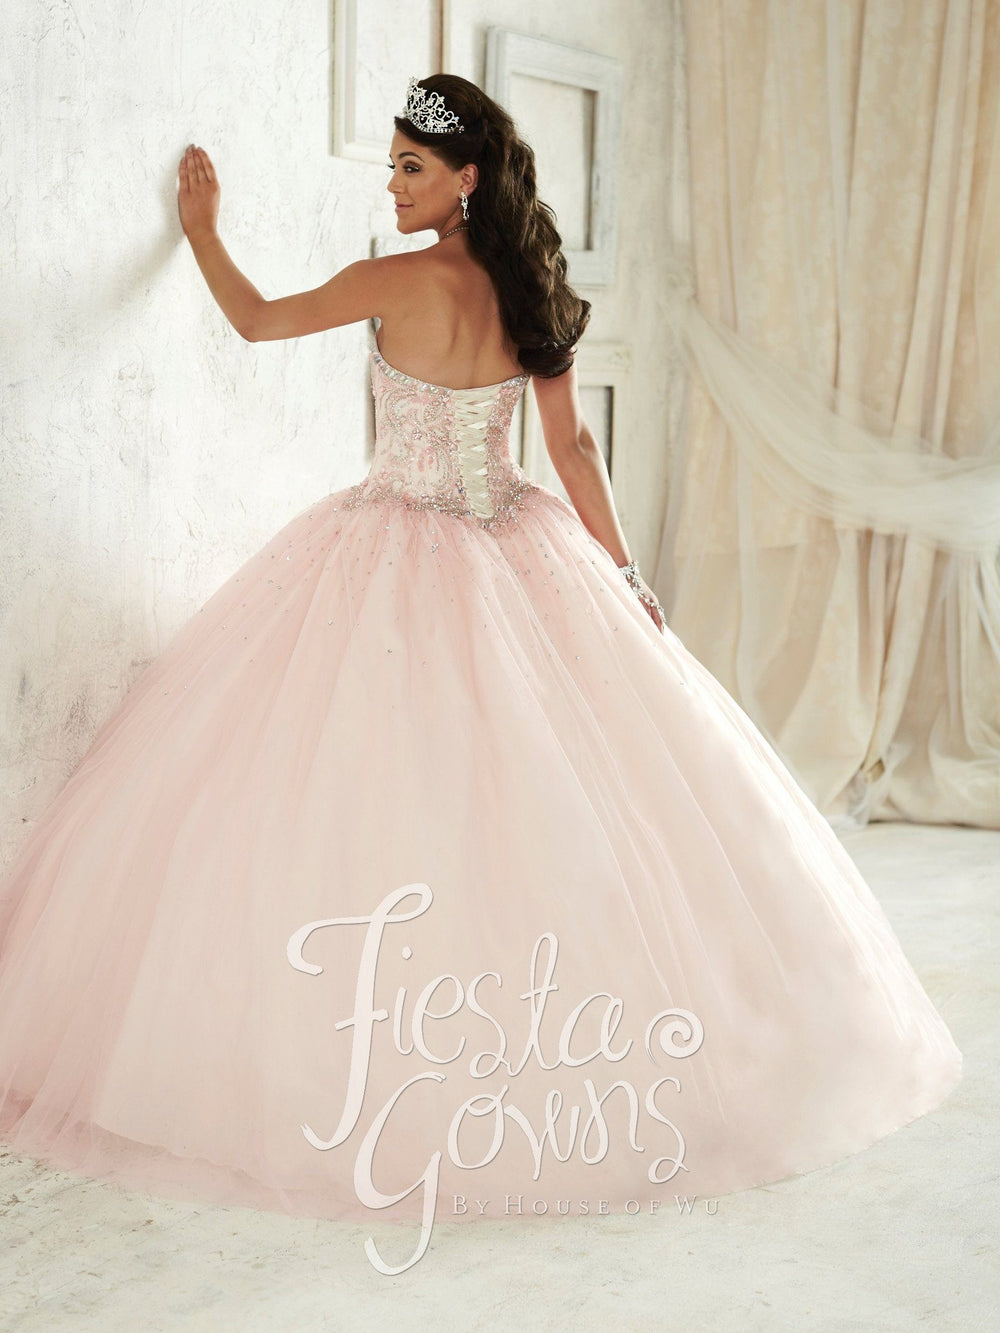 Beaded Strapless Dress by House of Wu Fiesta Gowns Style 56287-Quinceanera Dresses-ABC Fashion